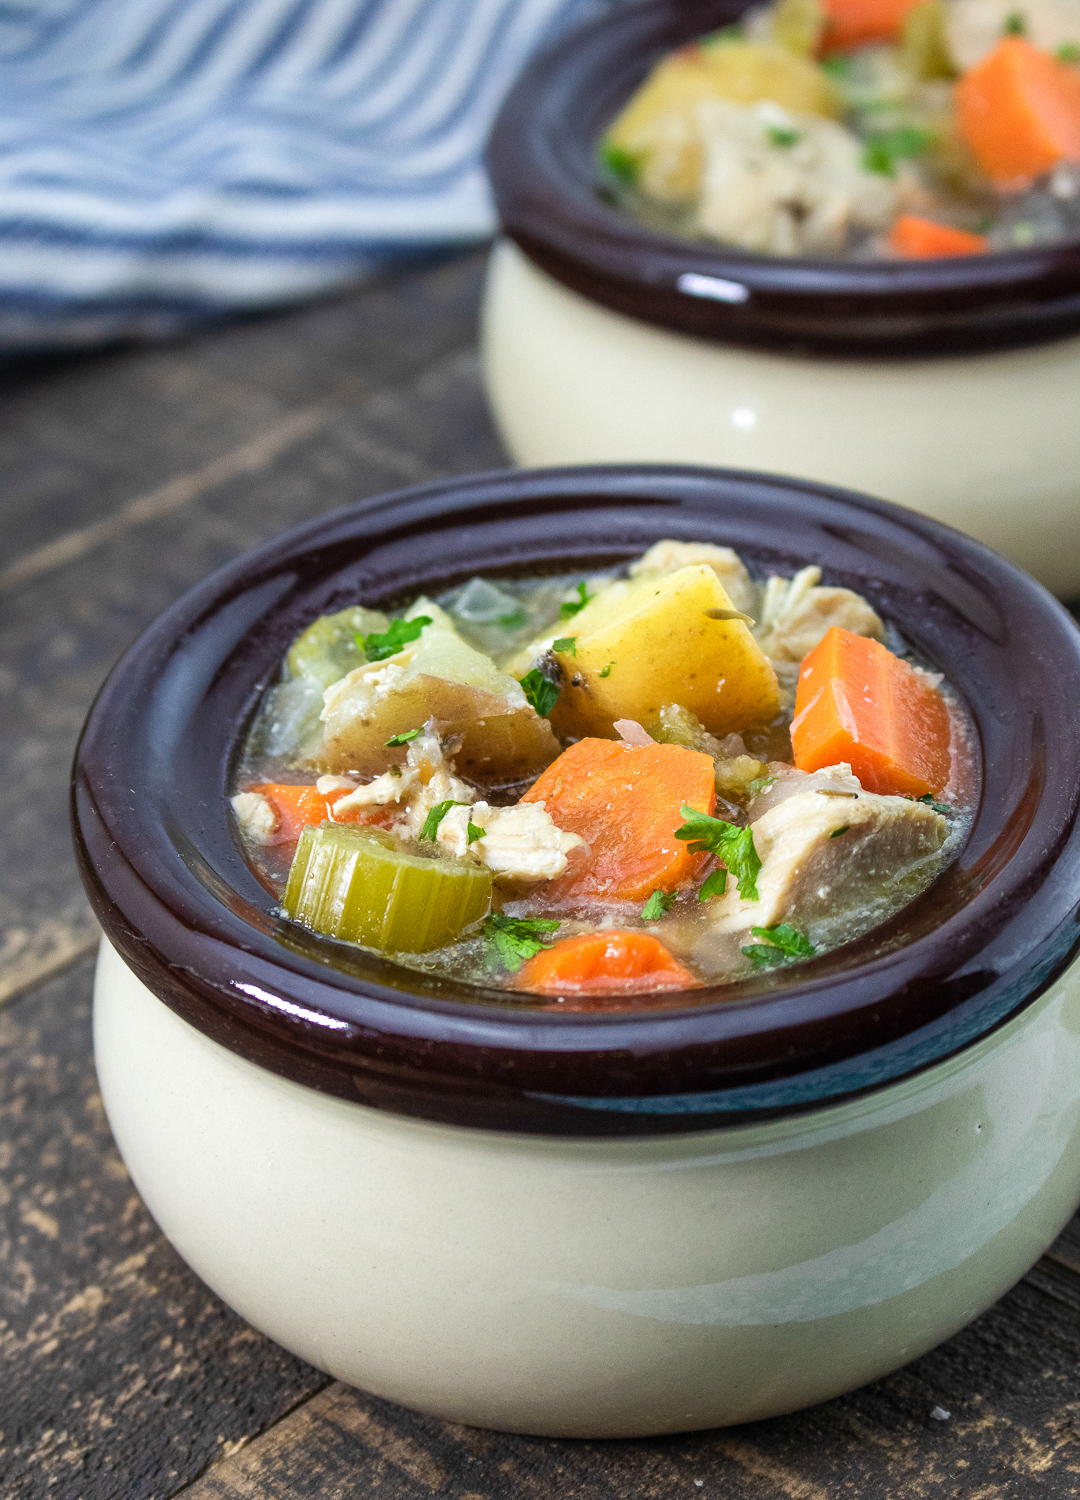 CHICKEN STEW RECIPES WITH VEGETABLES